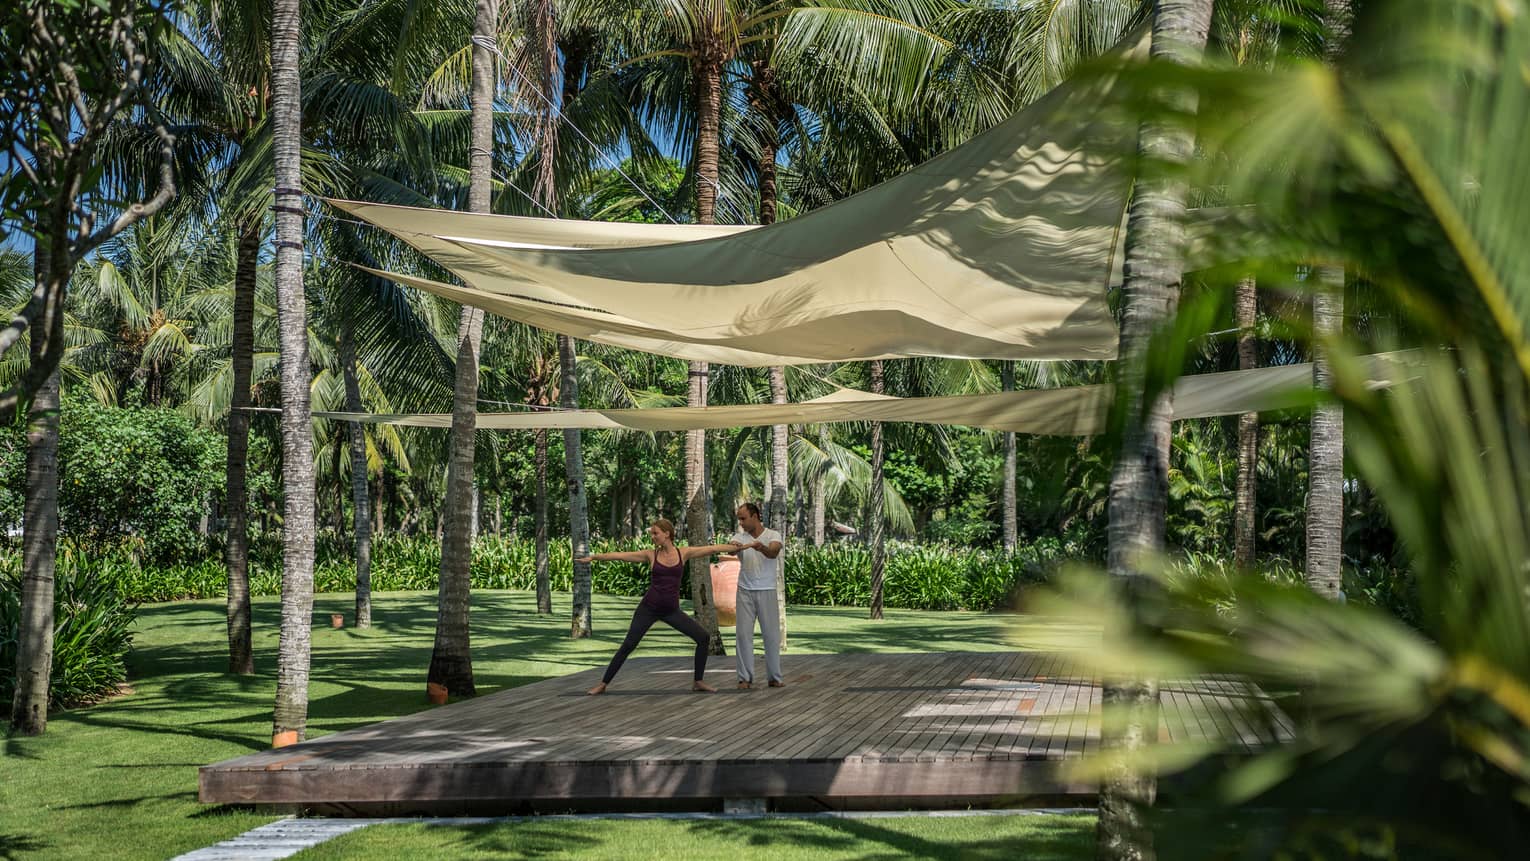 Yogi helps two people with yoga poses on wood platform under canopies